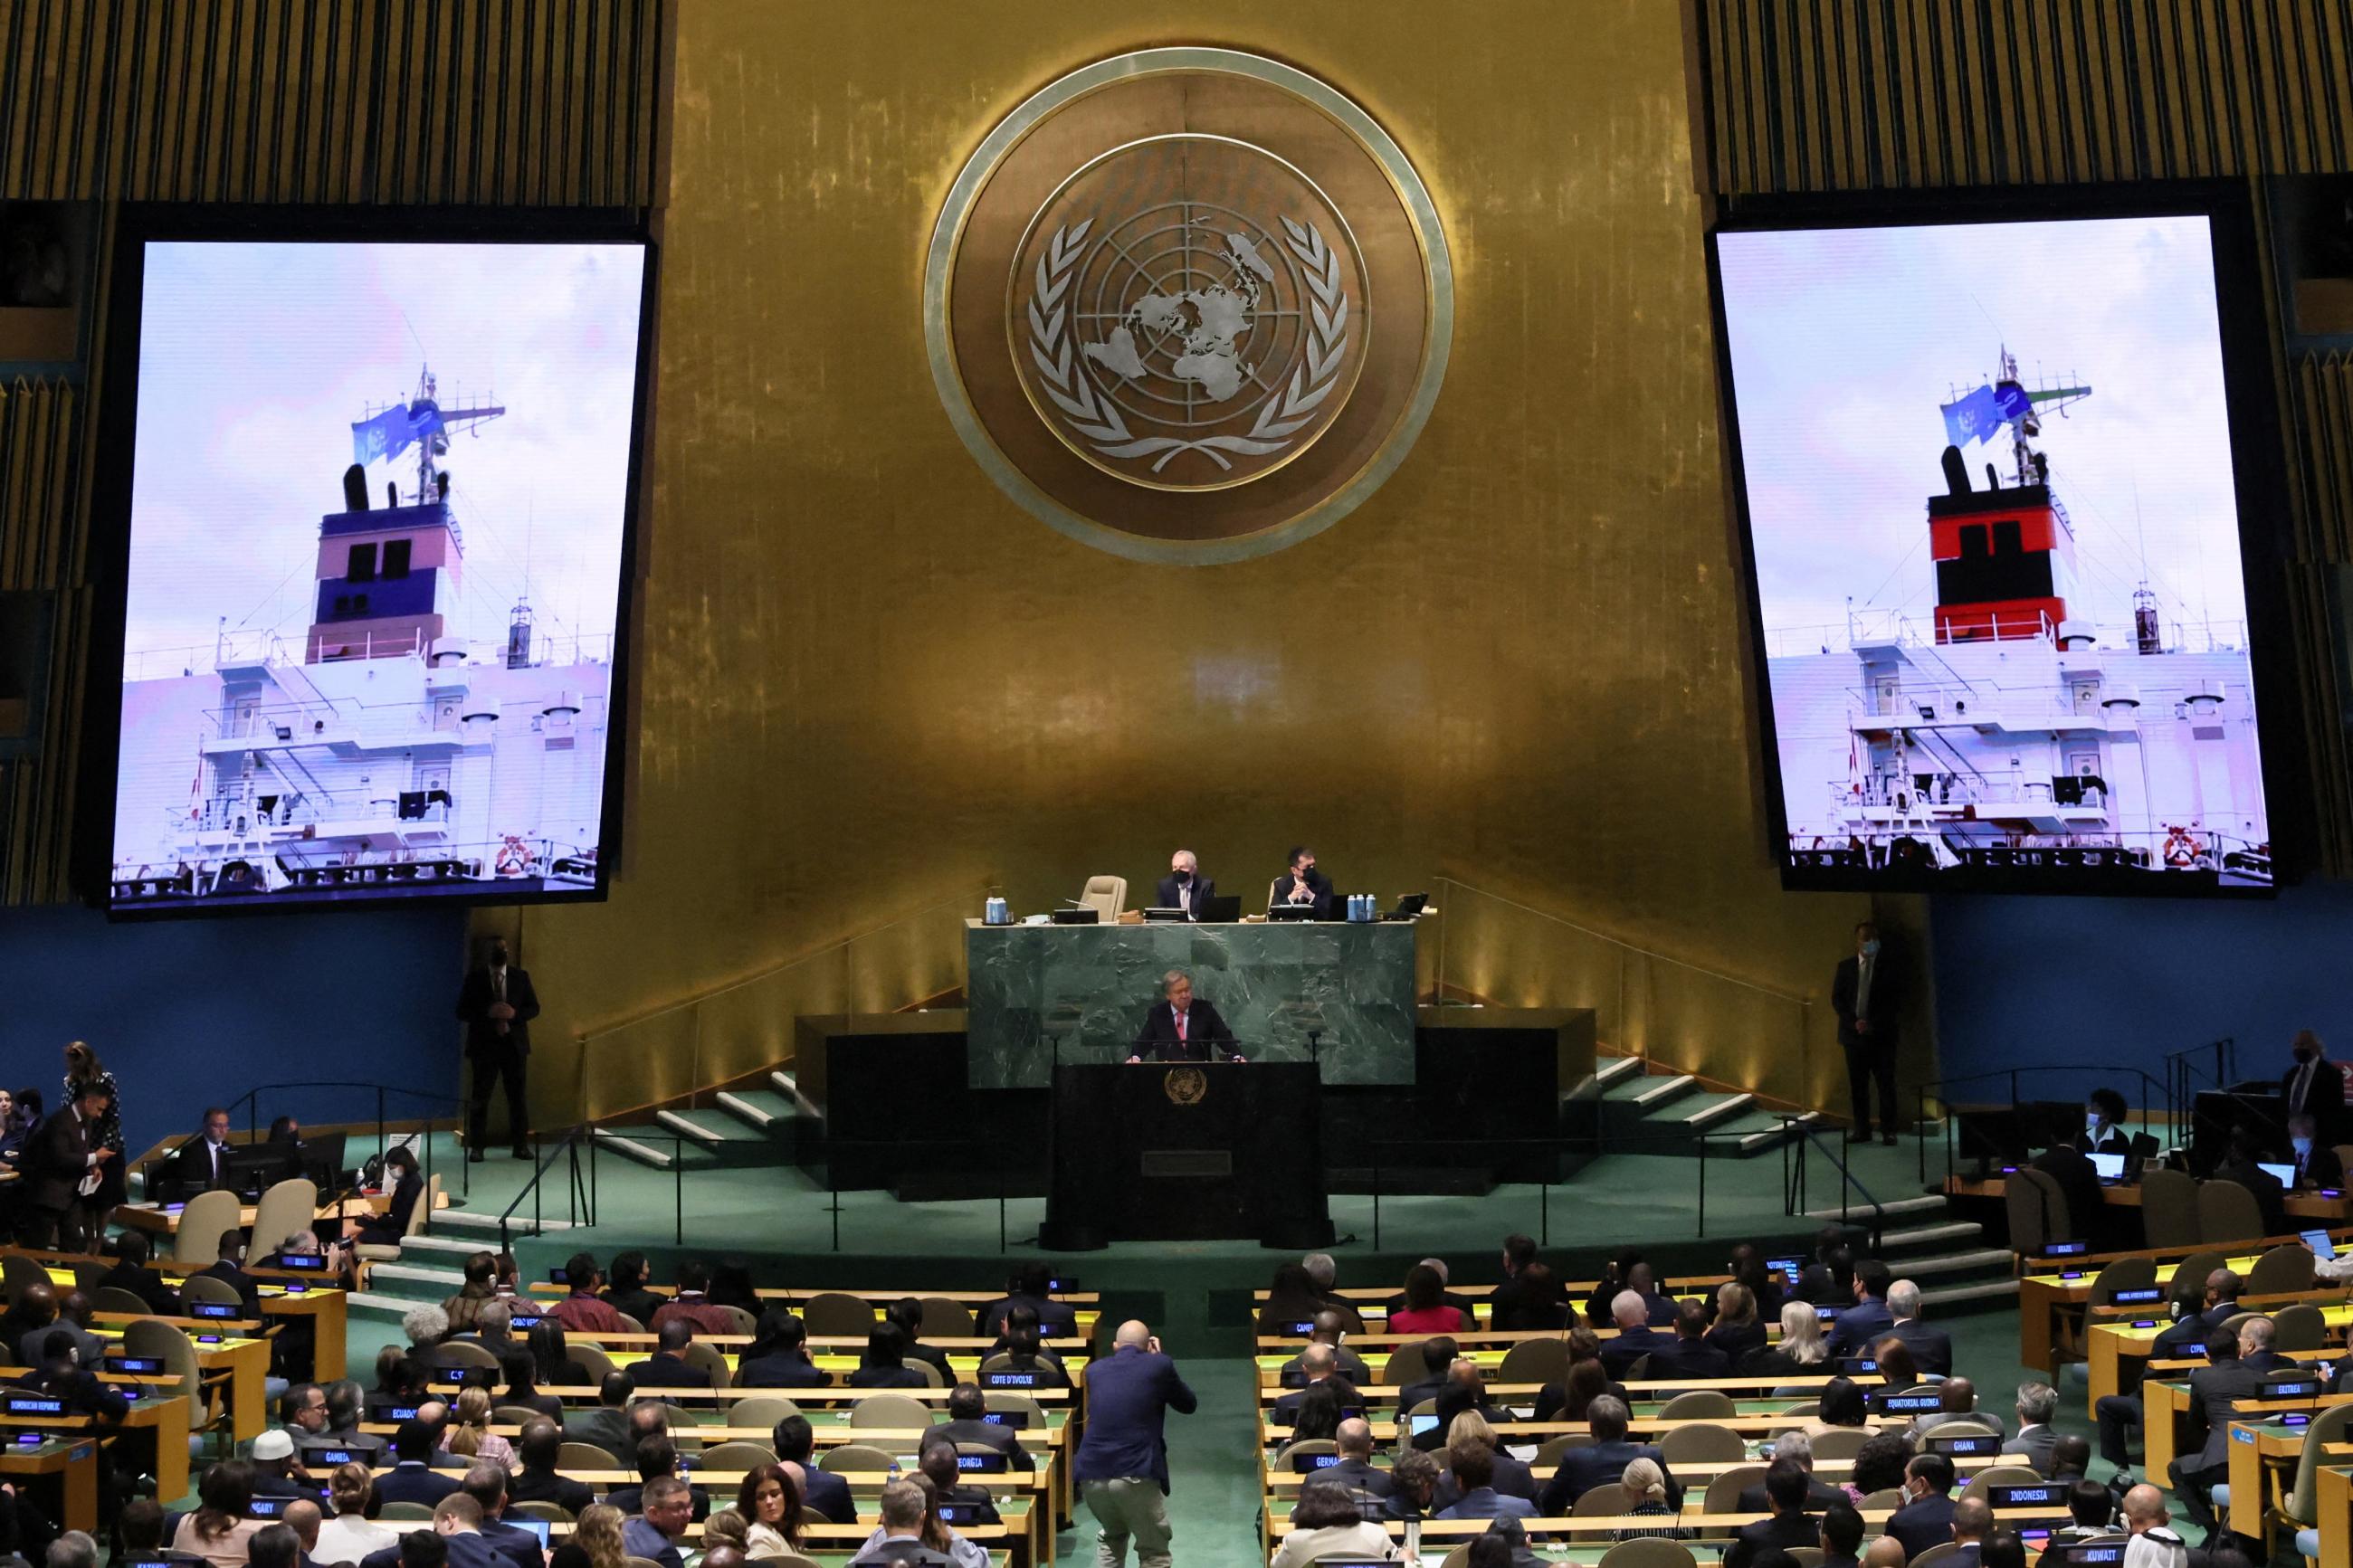 UN Secretary-General António Guterres displays on two giant screens in a large assembly hall images of a cargo ship of Ukrainian grain at the 77th Session of the UN General Assembly, at UN Headquarters in New York, on September 20, 2022.